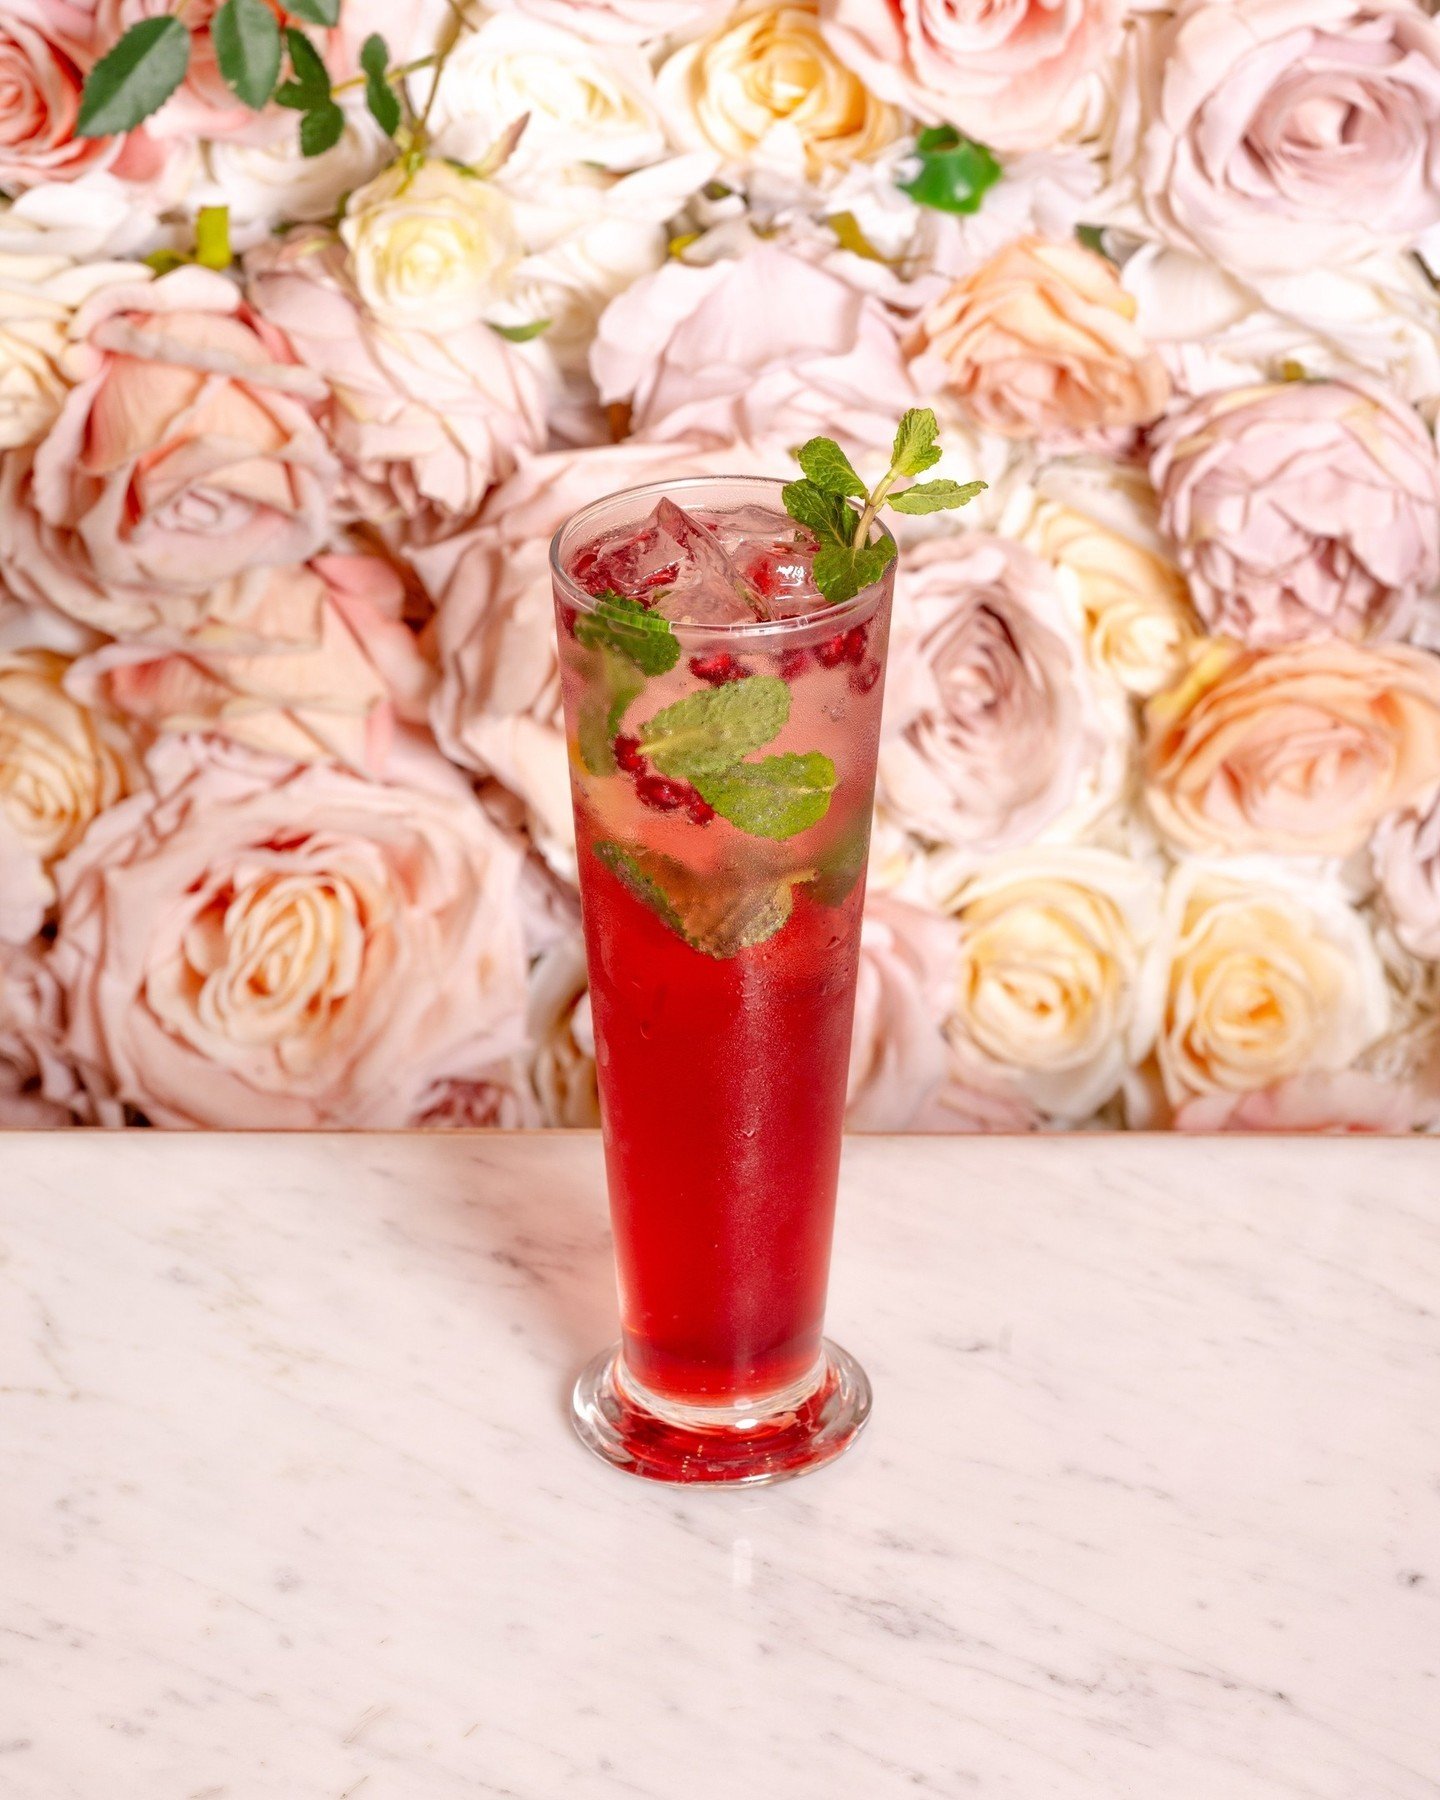 Pomegranate Mojito: Zesty, refreshing, and bursting with flavour!⁠
.⁠
.⁠
.⁠
#chocoberry #cafe #dessert #desserts #sweettooth #sweet #foodie #foodies #leicesterfoodie #derbyfoodie #loughbroughfoodie #nottinghamfoodie #cardifffoodie #birmighamfoodie #l